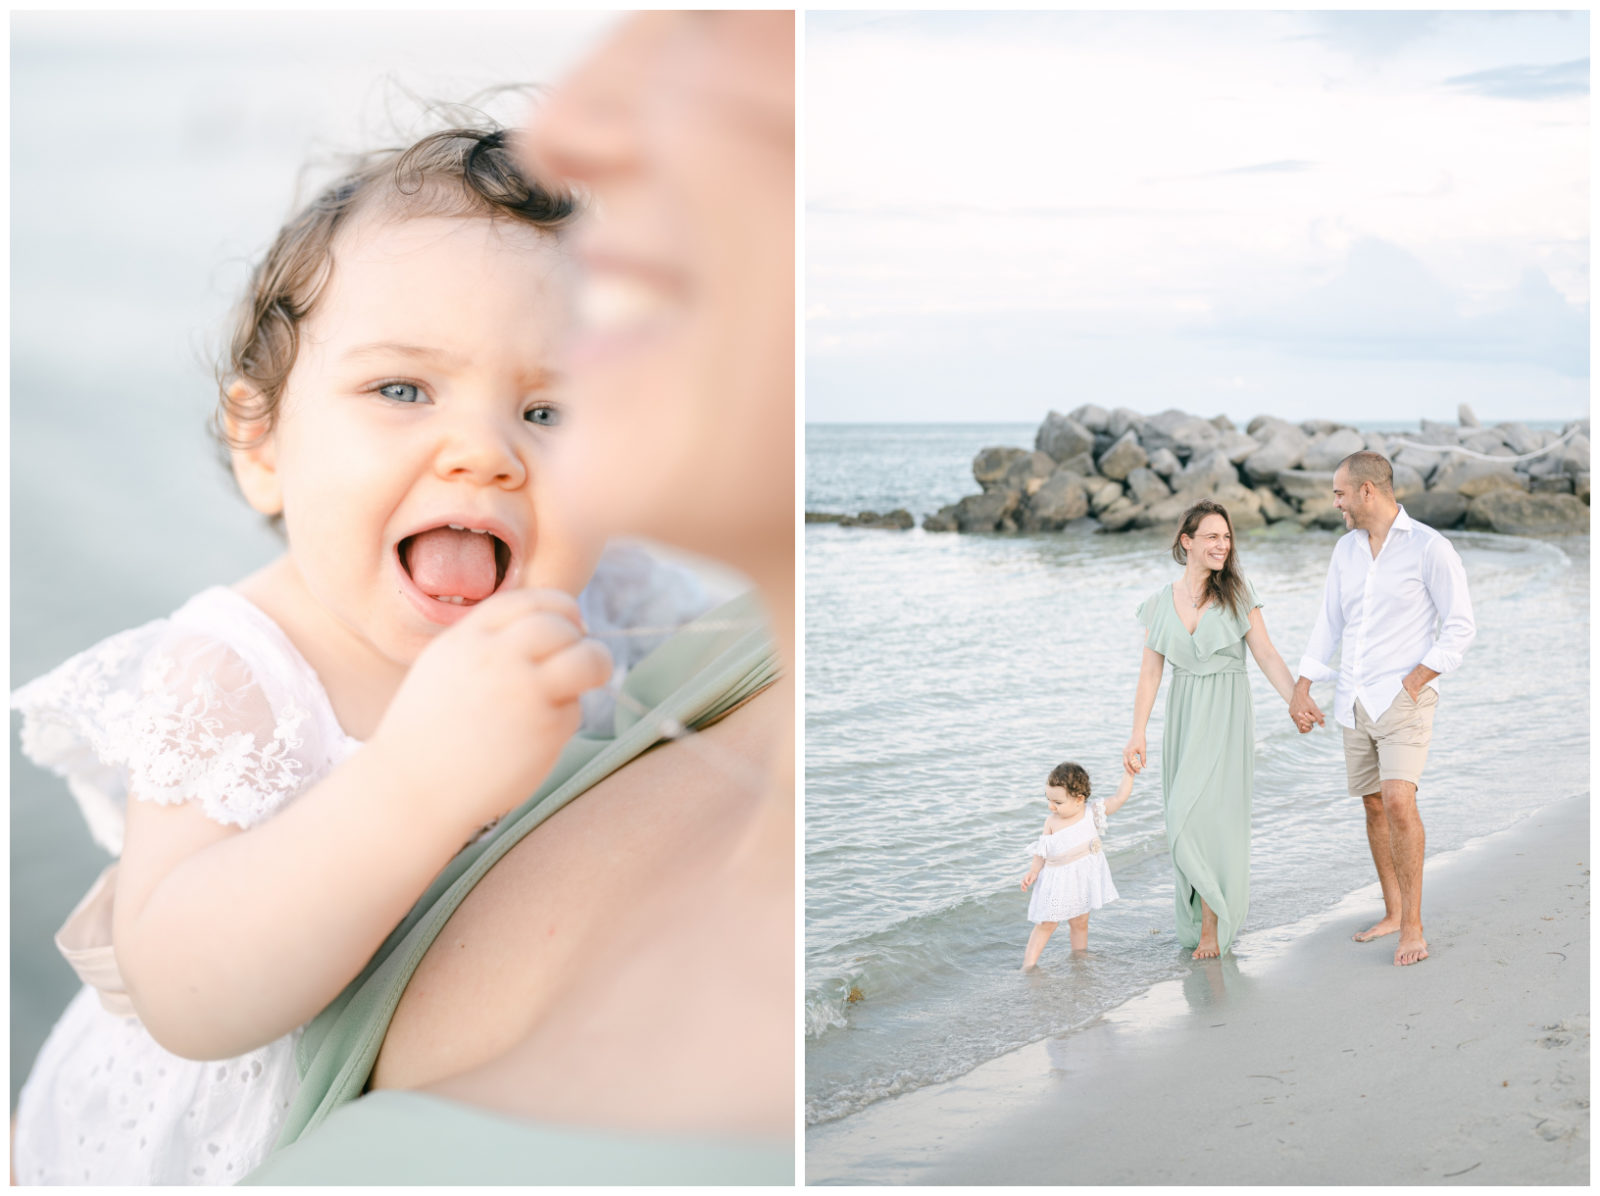 Mom and baby snuggling on the beach 1 year milestone session